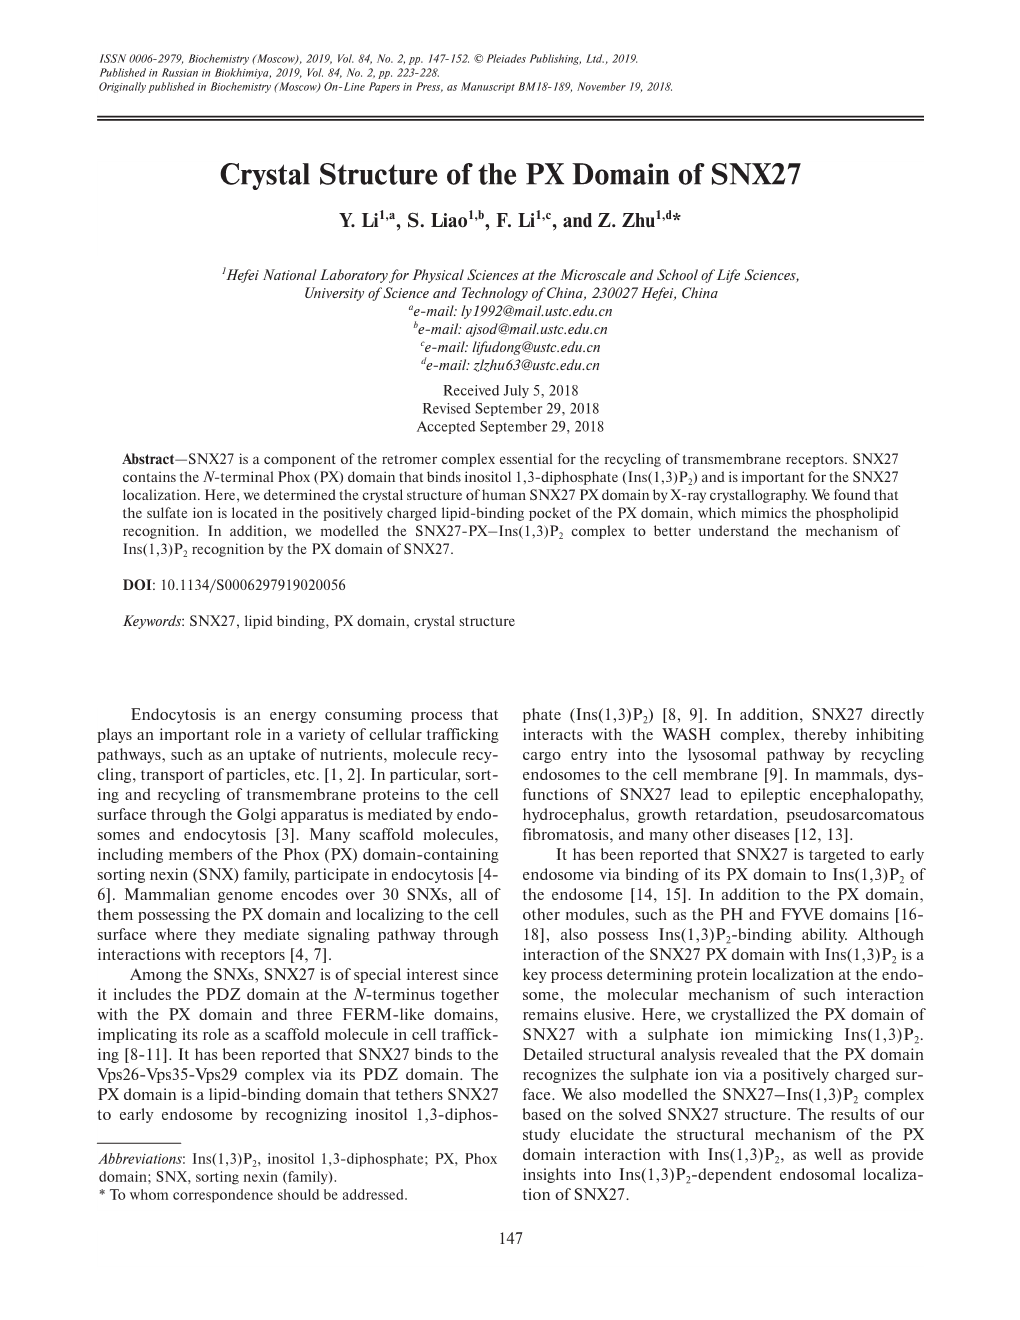 Crystal Structure of the PX Domain of SNX27